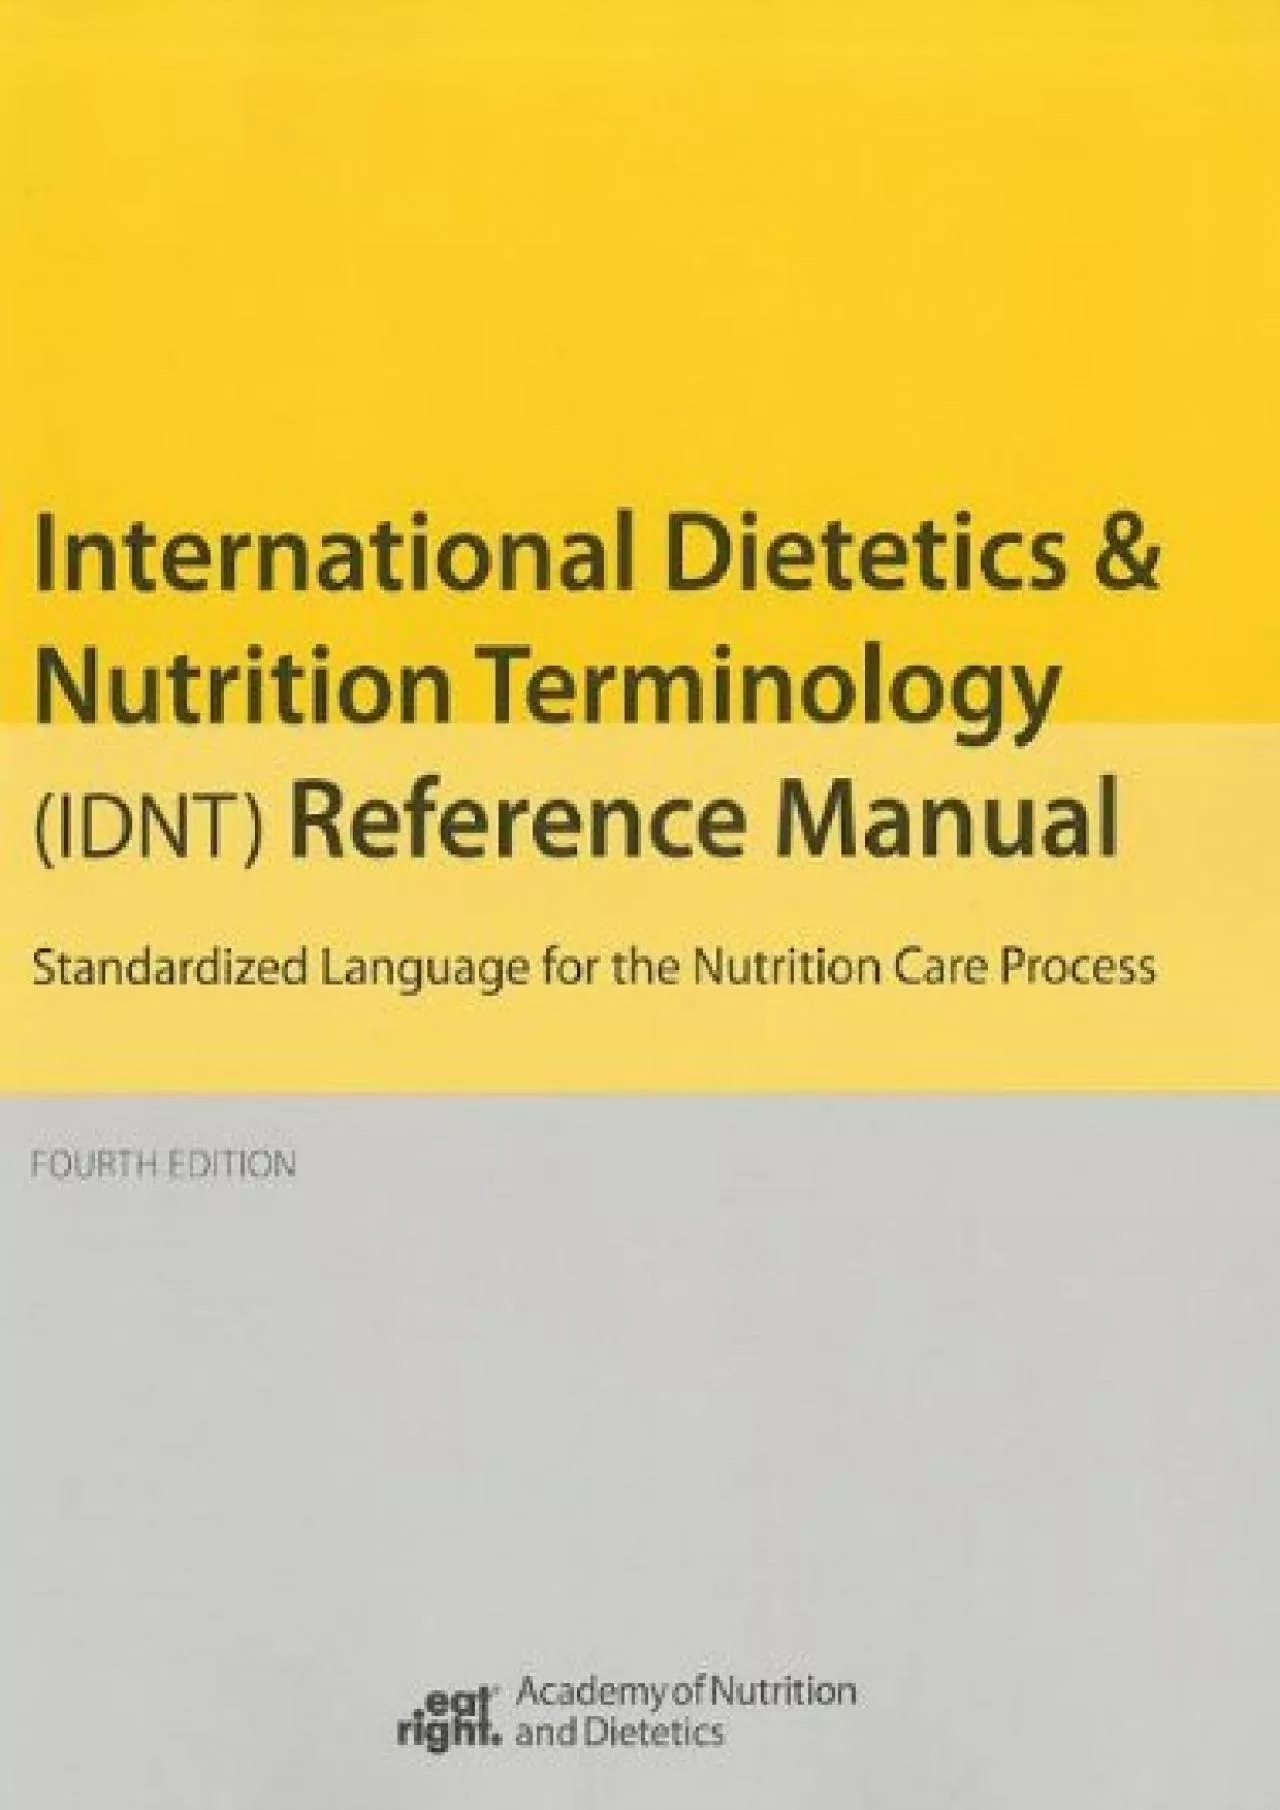 (BOOK)-International Dietetics and Nutritional Terminology (Idnt) Reference Manual: Standard